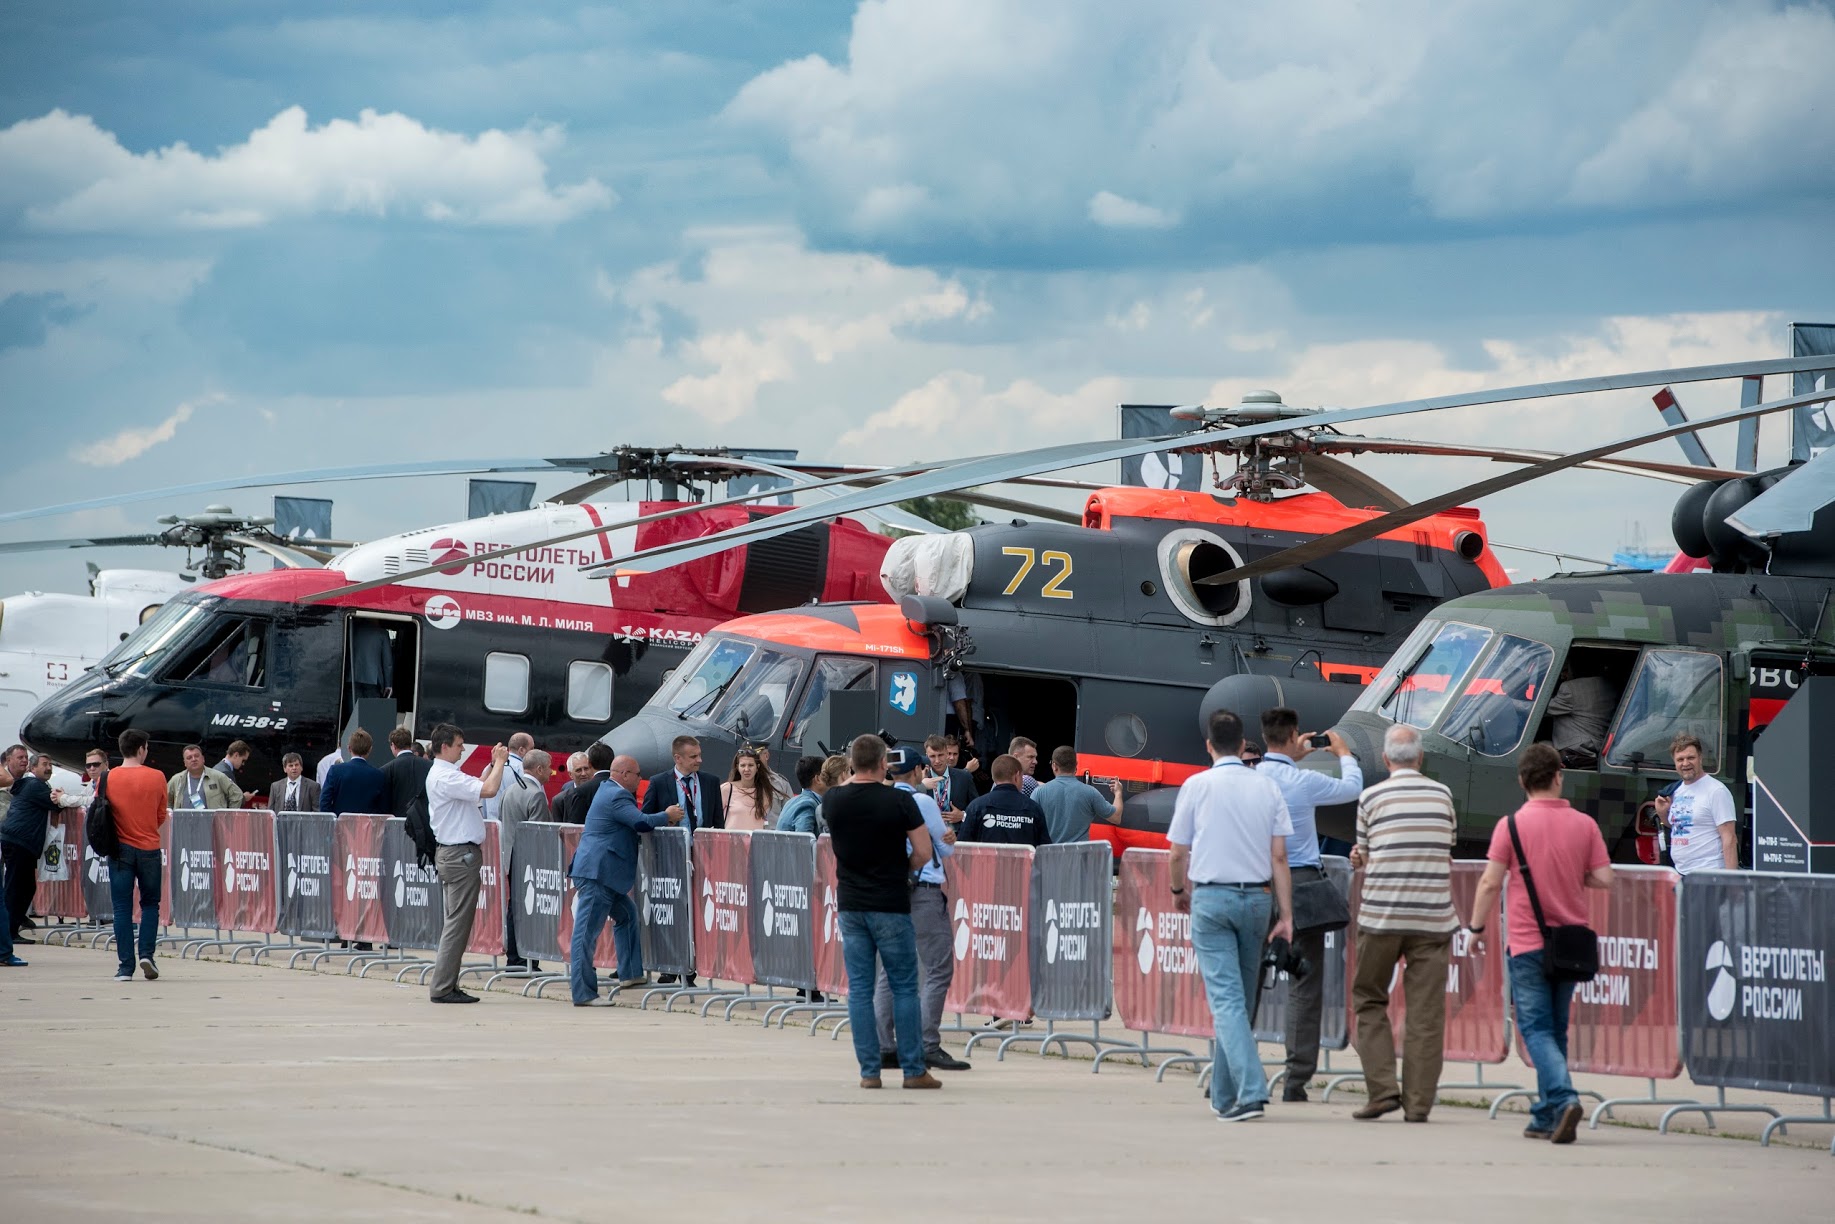 Rostec Suggests Using Automobile Leasing Scheme to Renew Russian Helicopter Fleet